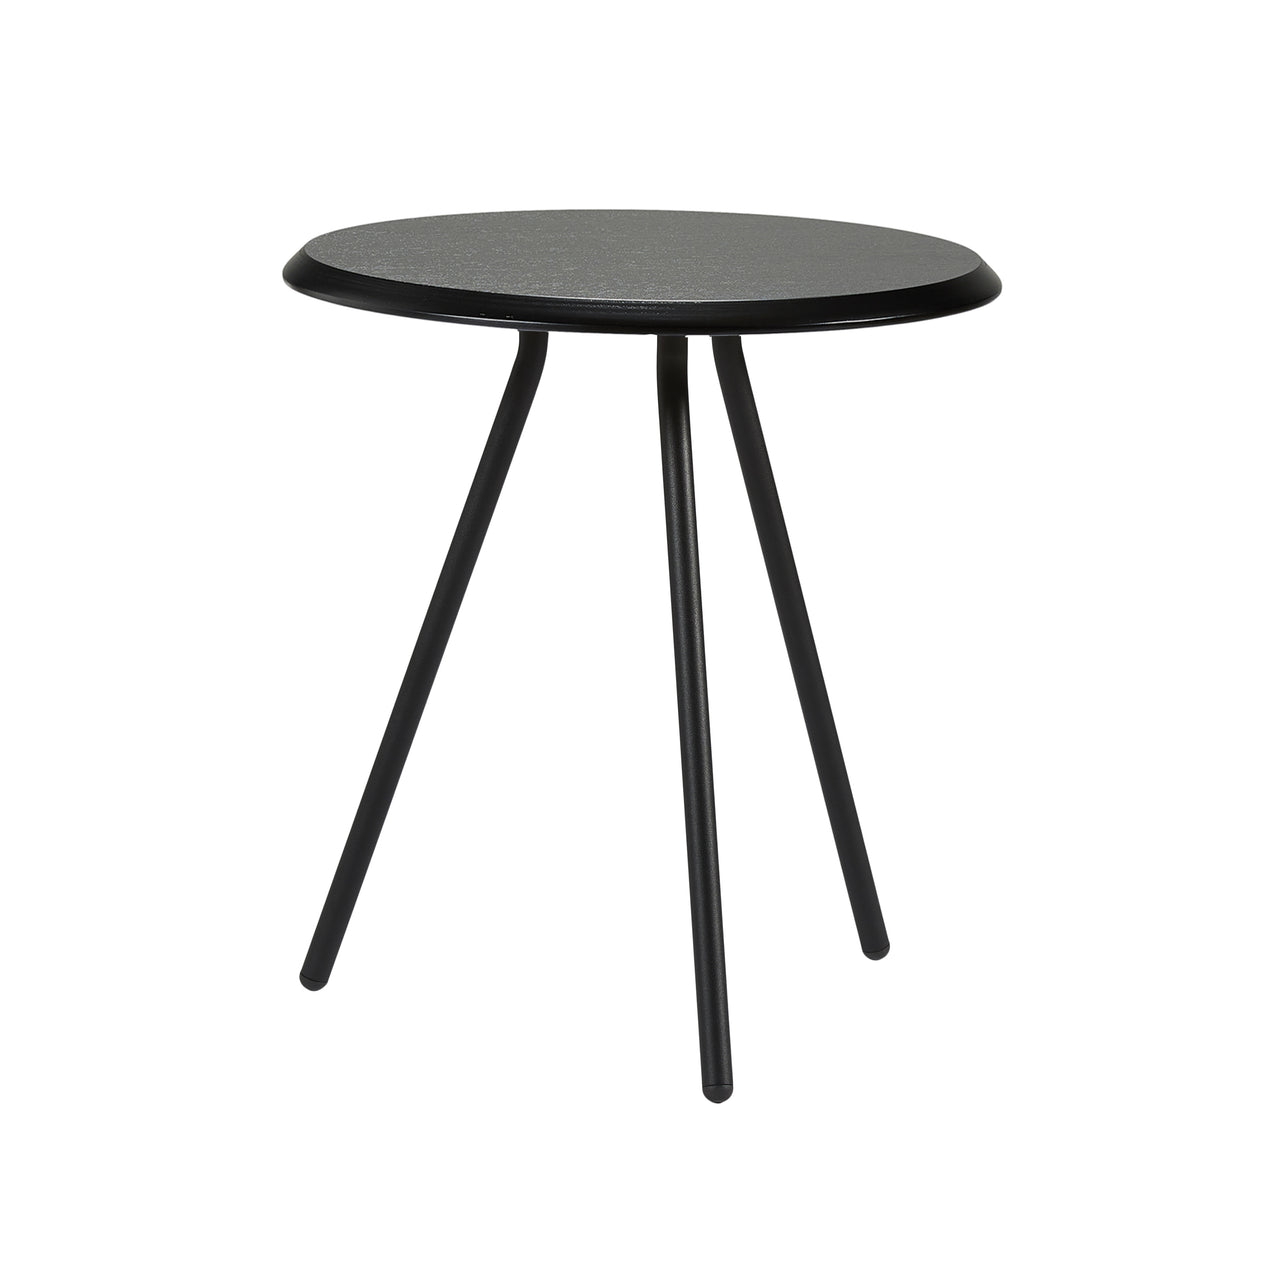 Soround Side Table: High + Black Painted Ash